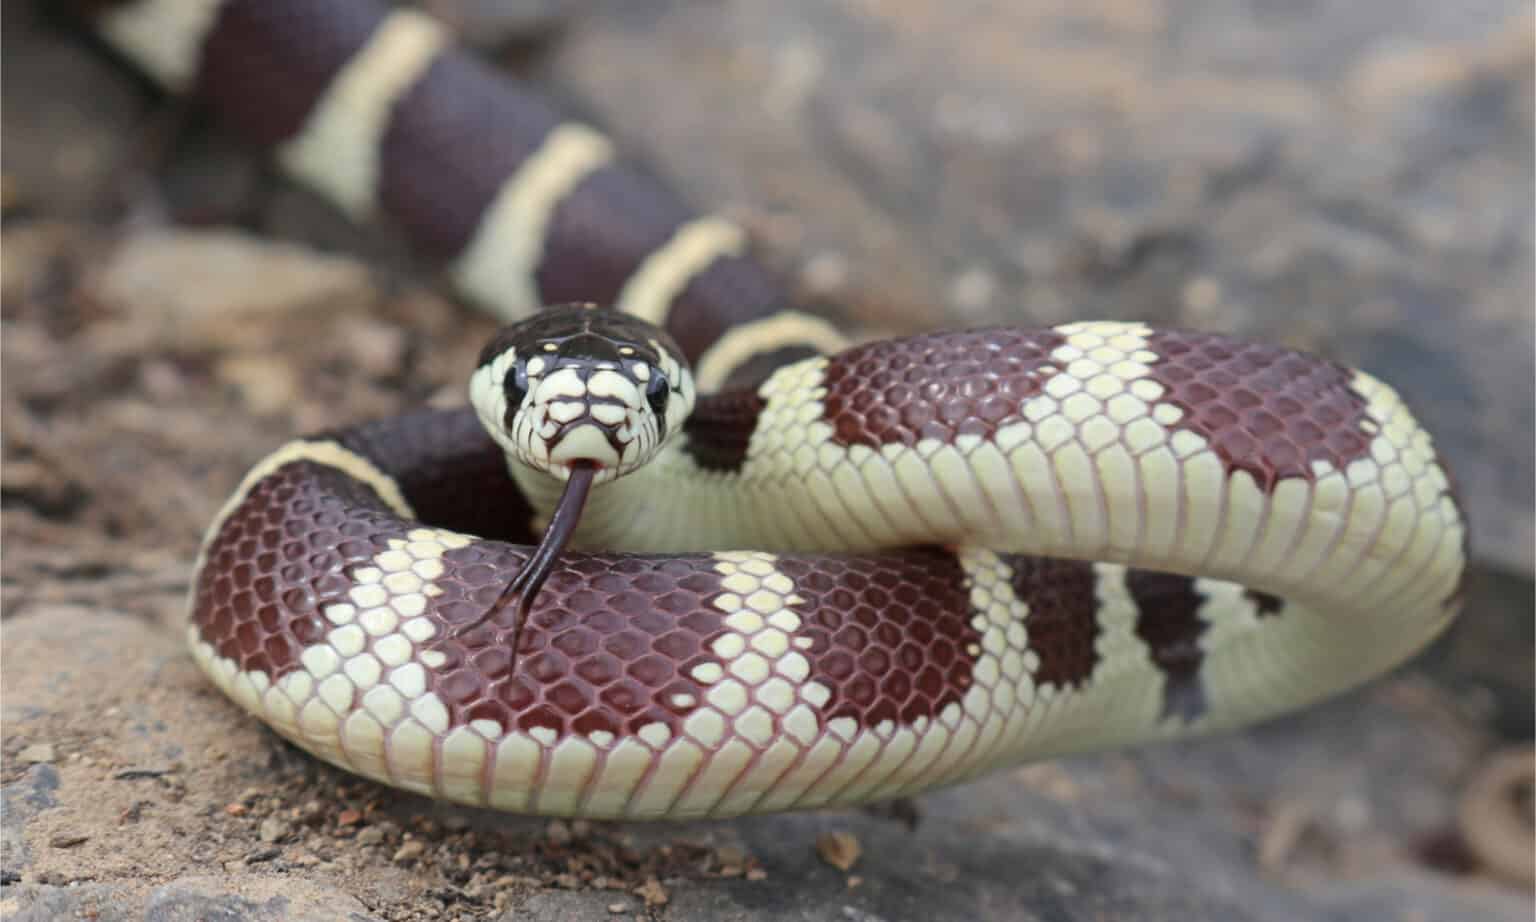 black and white striped snakes